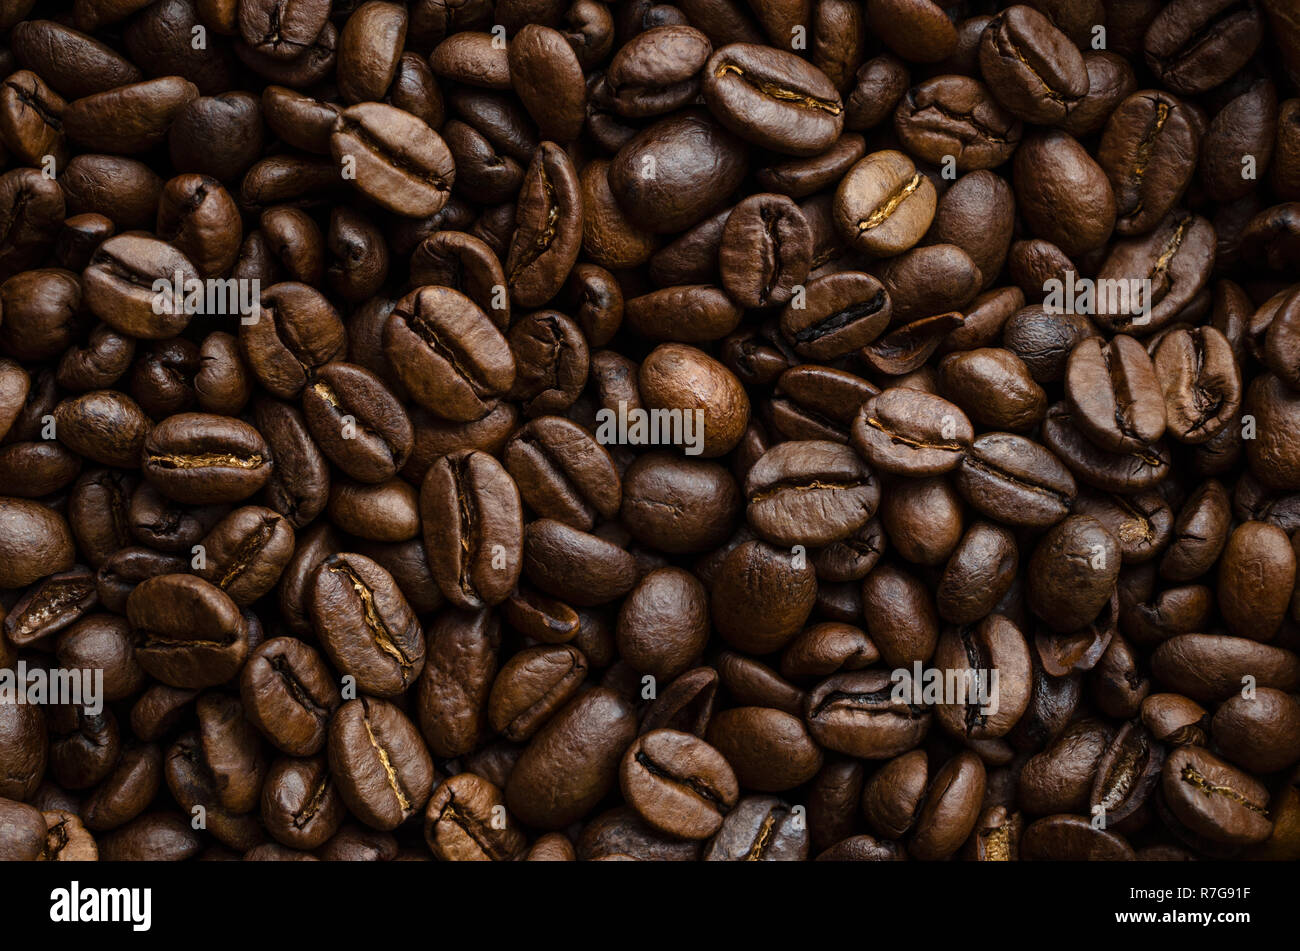 Darkly lit roasted coffee beans, piled together and filling frame to create a background texture in multiple shades of brown and gold. Stock Photo